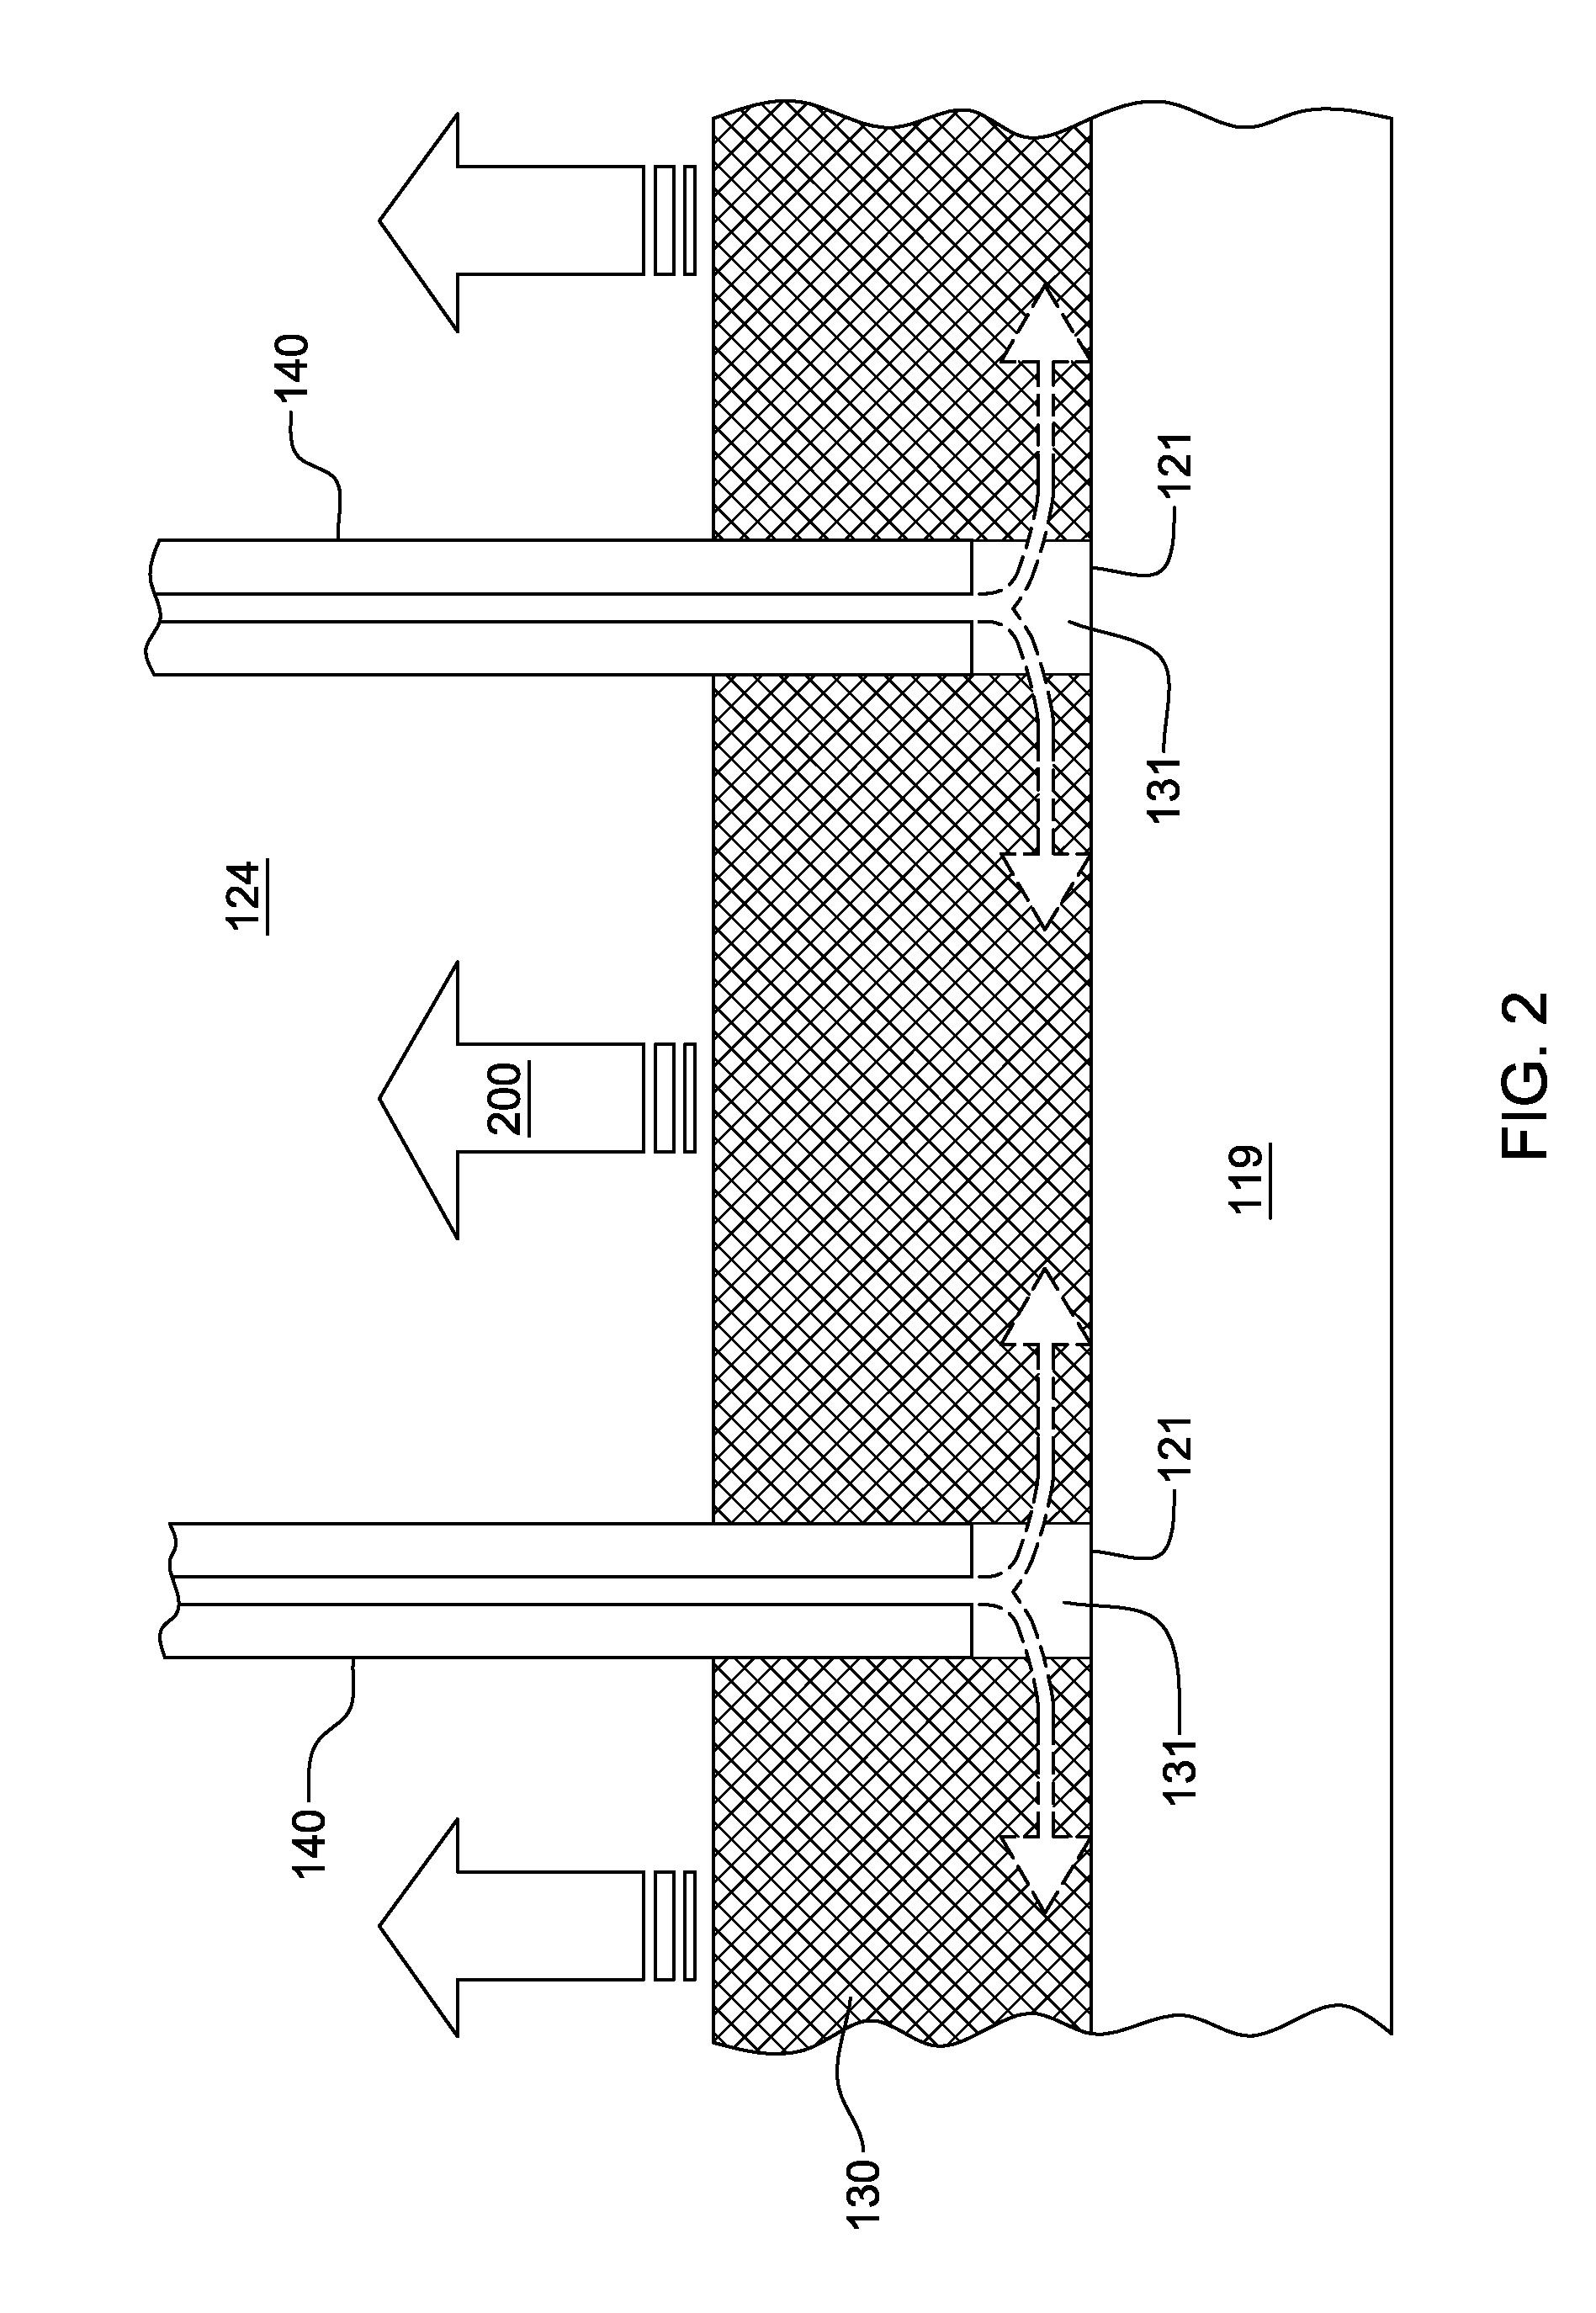 Cooling apparatus with thermally conductive porous material and jet impingement nozzle(s) extending therein